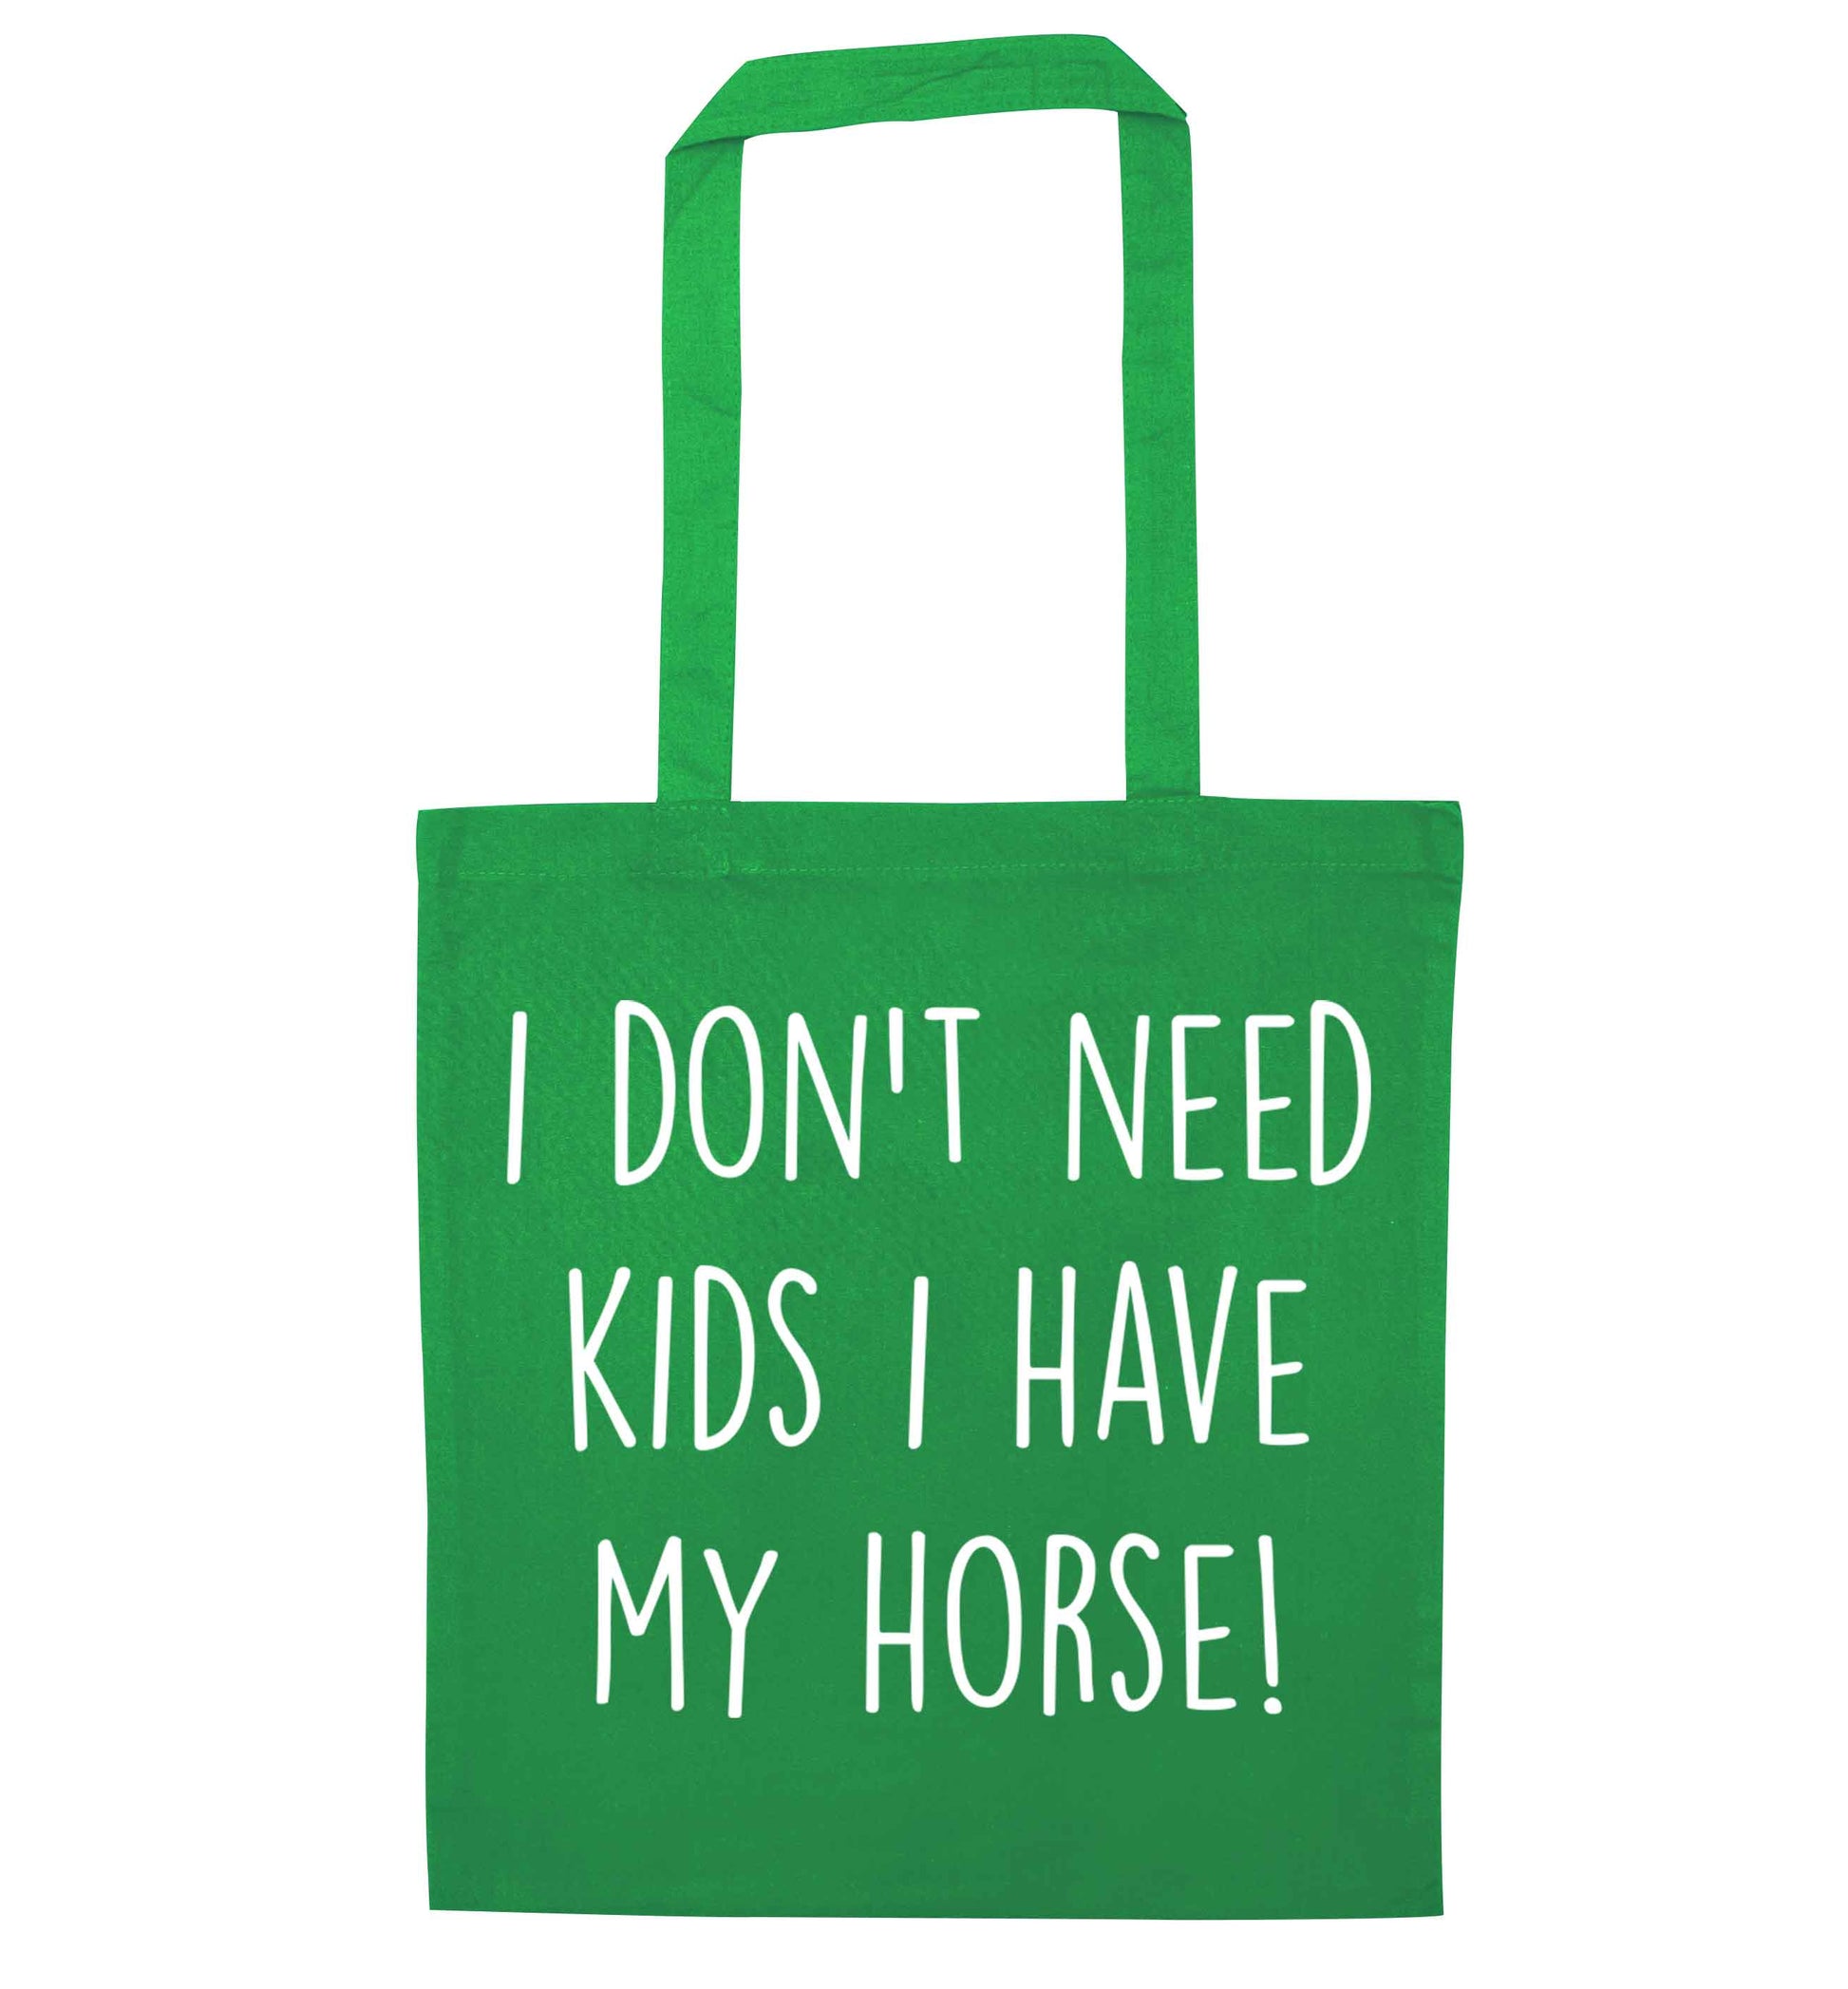 I don't need kids I have my horse green tote bag